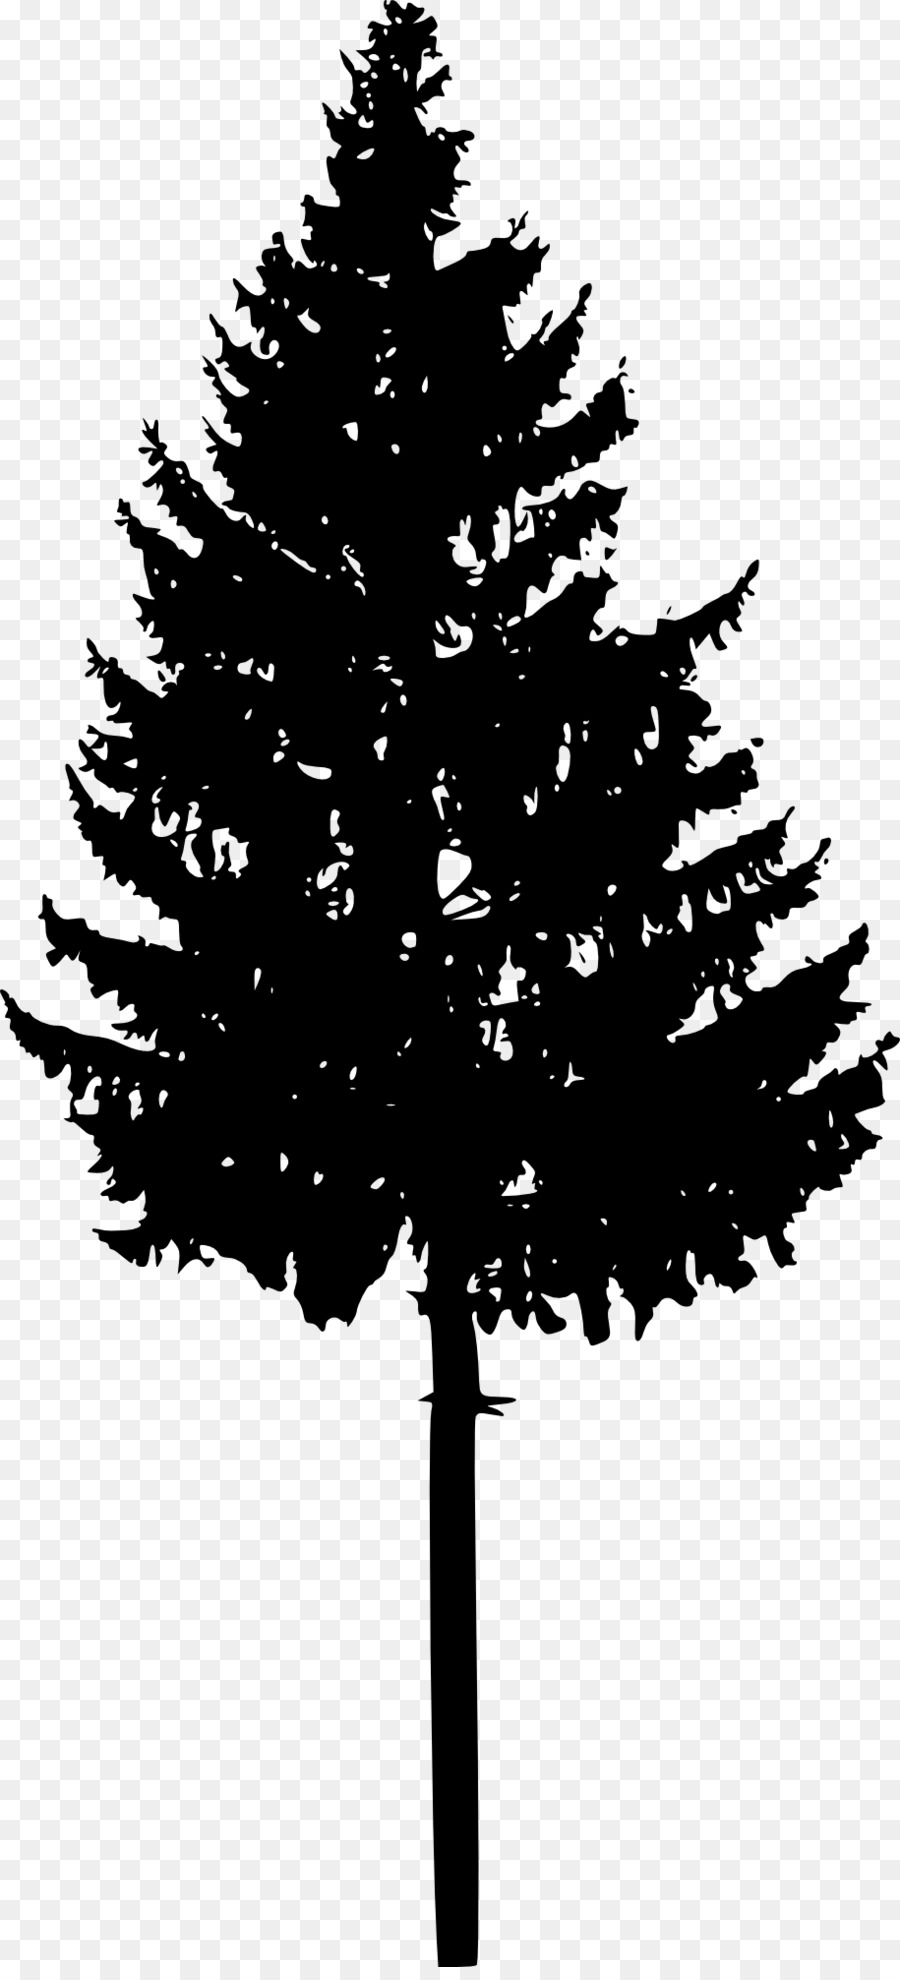 Tree Spruce Fir Conifers Silhouette - silhouettes png download - 915*2000 - Free Transparent Tree png Download.